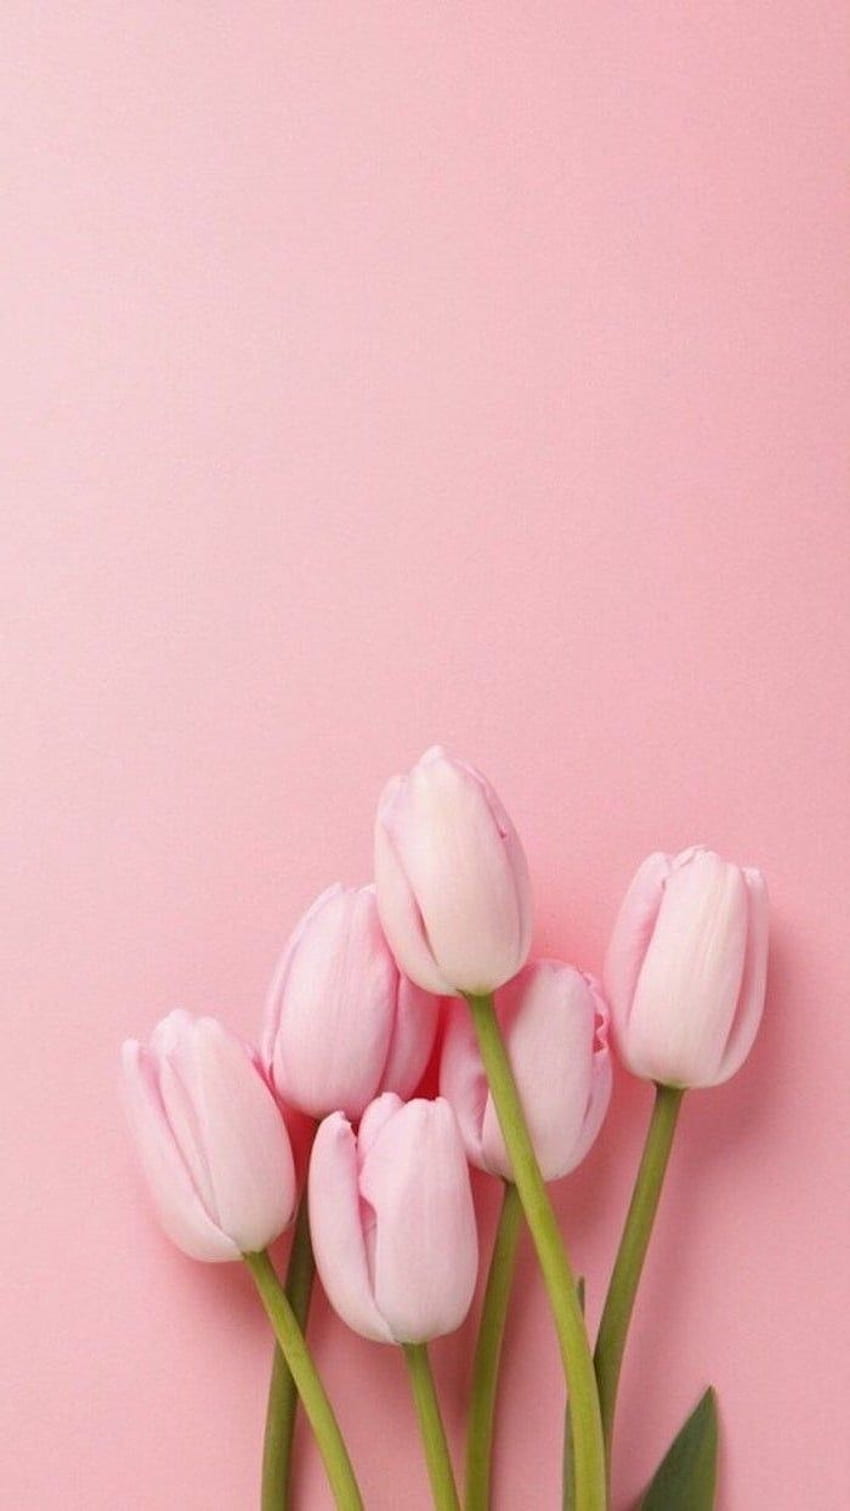 pink tulips at the bottom, on a pink background, spring , phone . Papel de parede floral, Papel de parede cor de rosa, Rosas papel de parede HD phone wallpaper